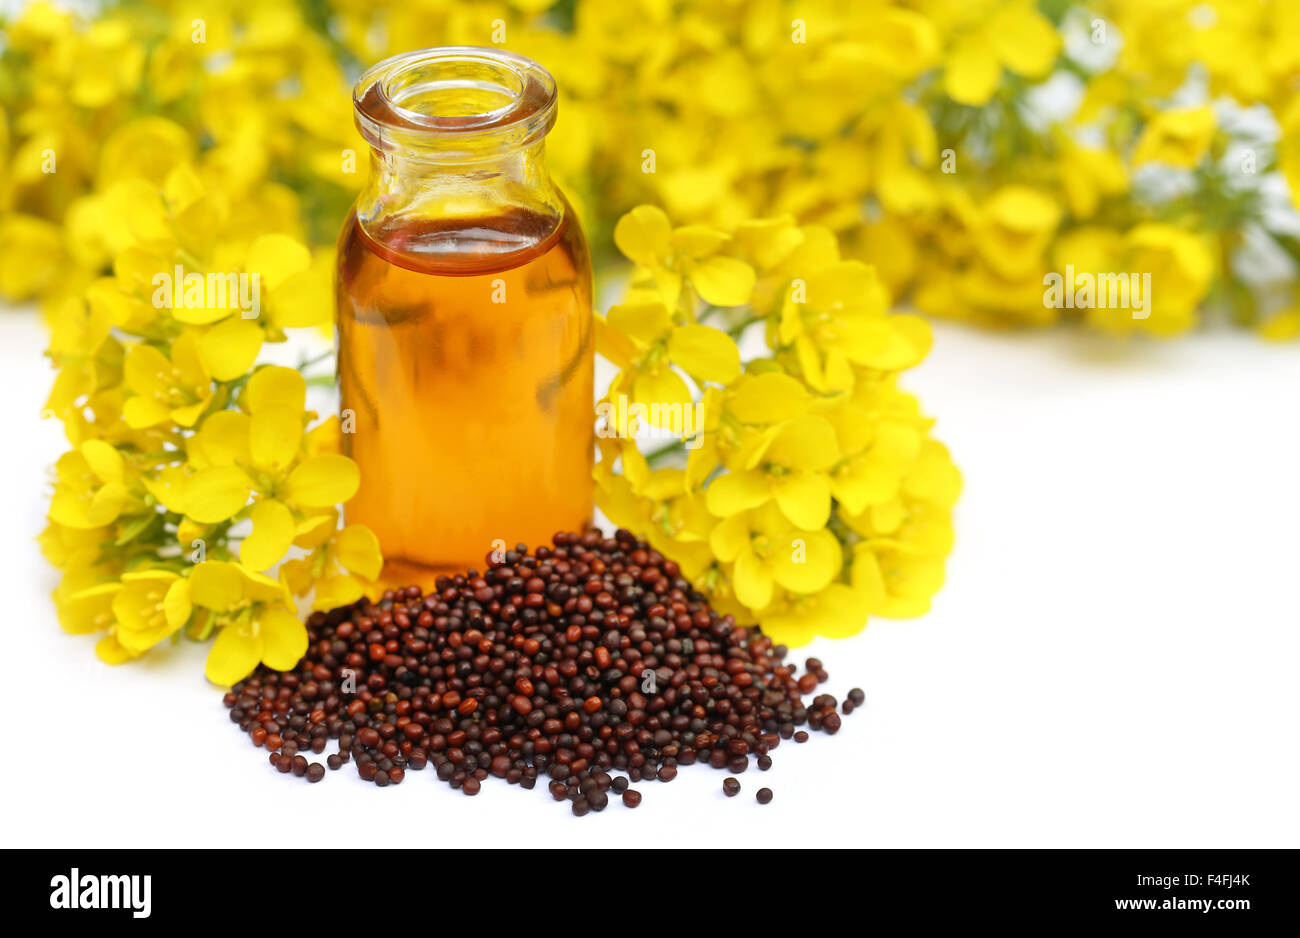 Mustard seed with oil and flower over white background Stock Photo